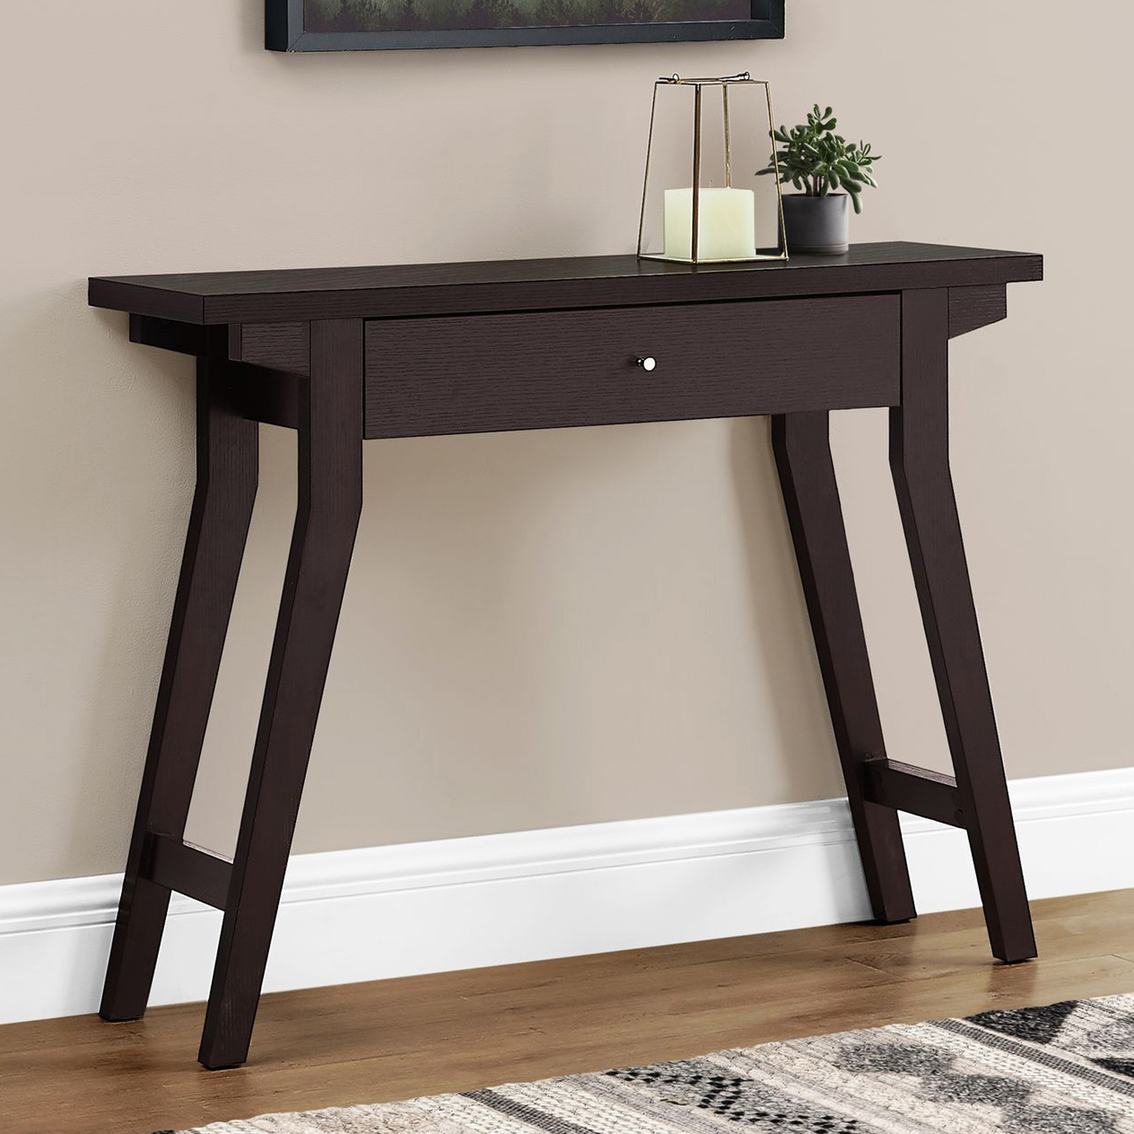 Chelsea Home Accent Table With Storage Drawer | Living Room Tables